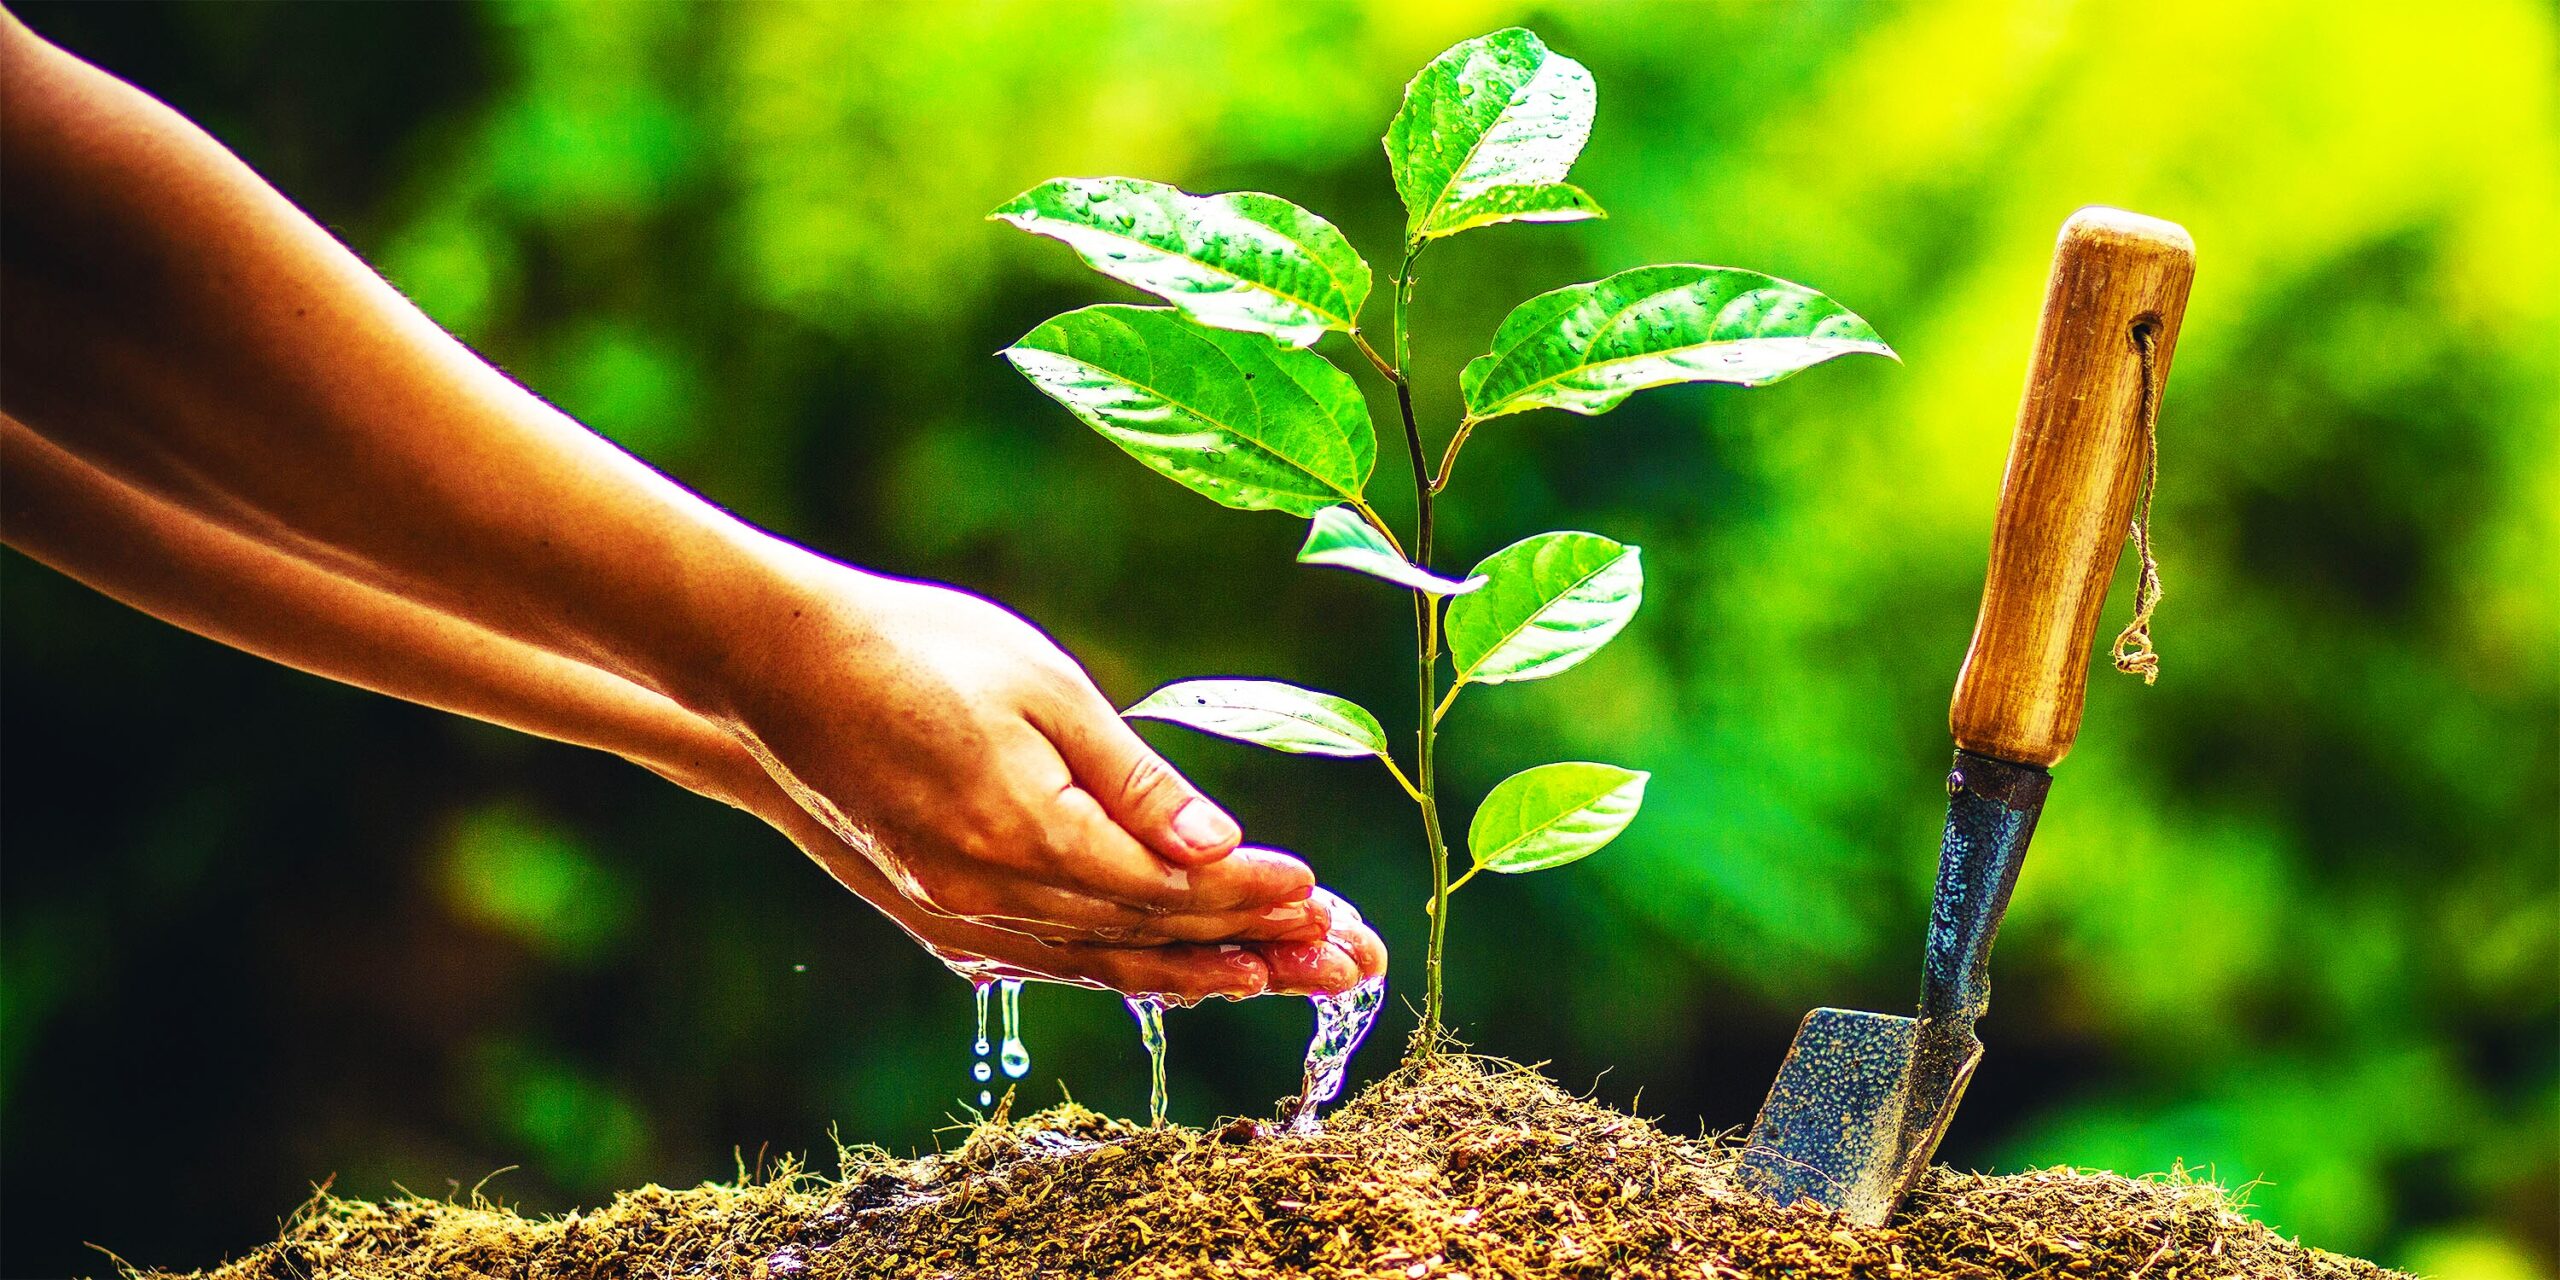 How to Plant a Tree When to Plant a Tree and What to Consider for Planting a Tree